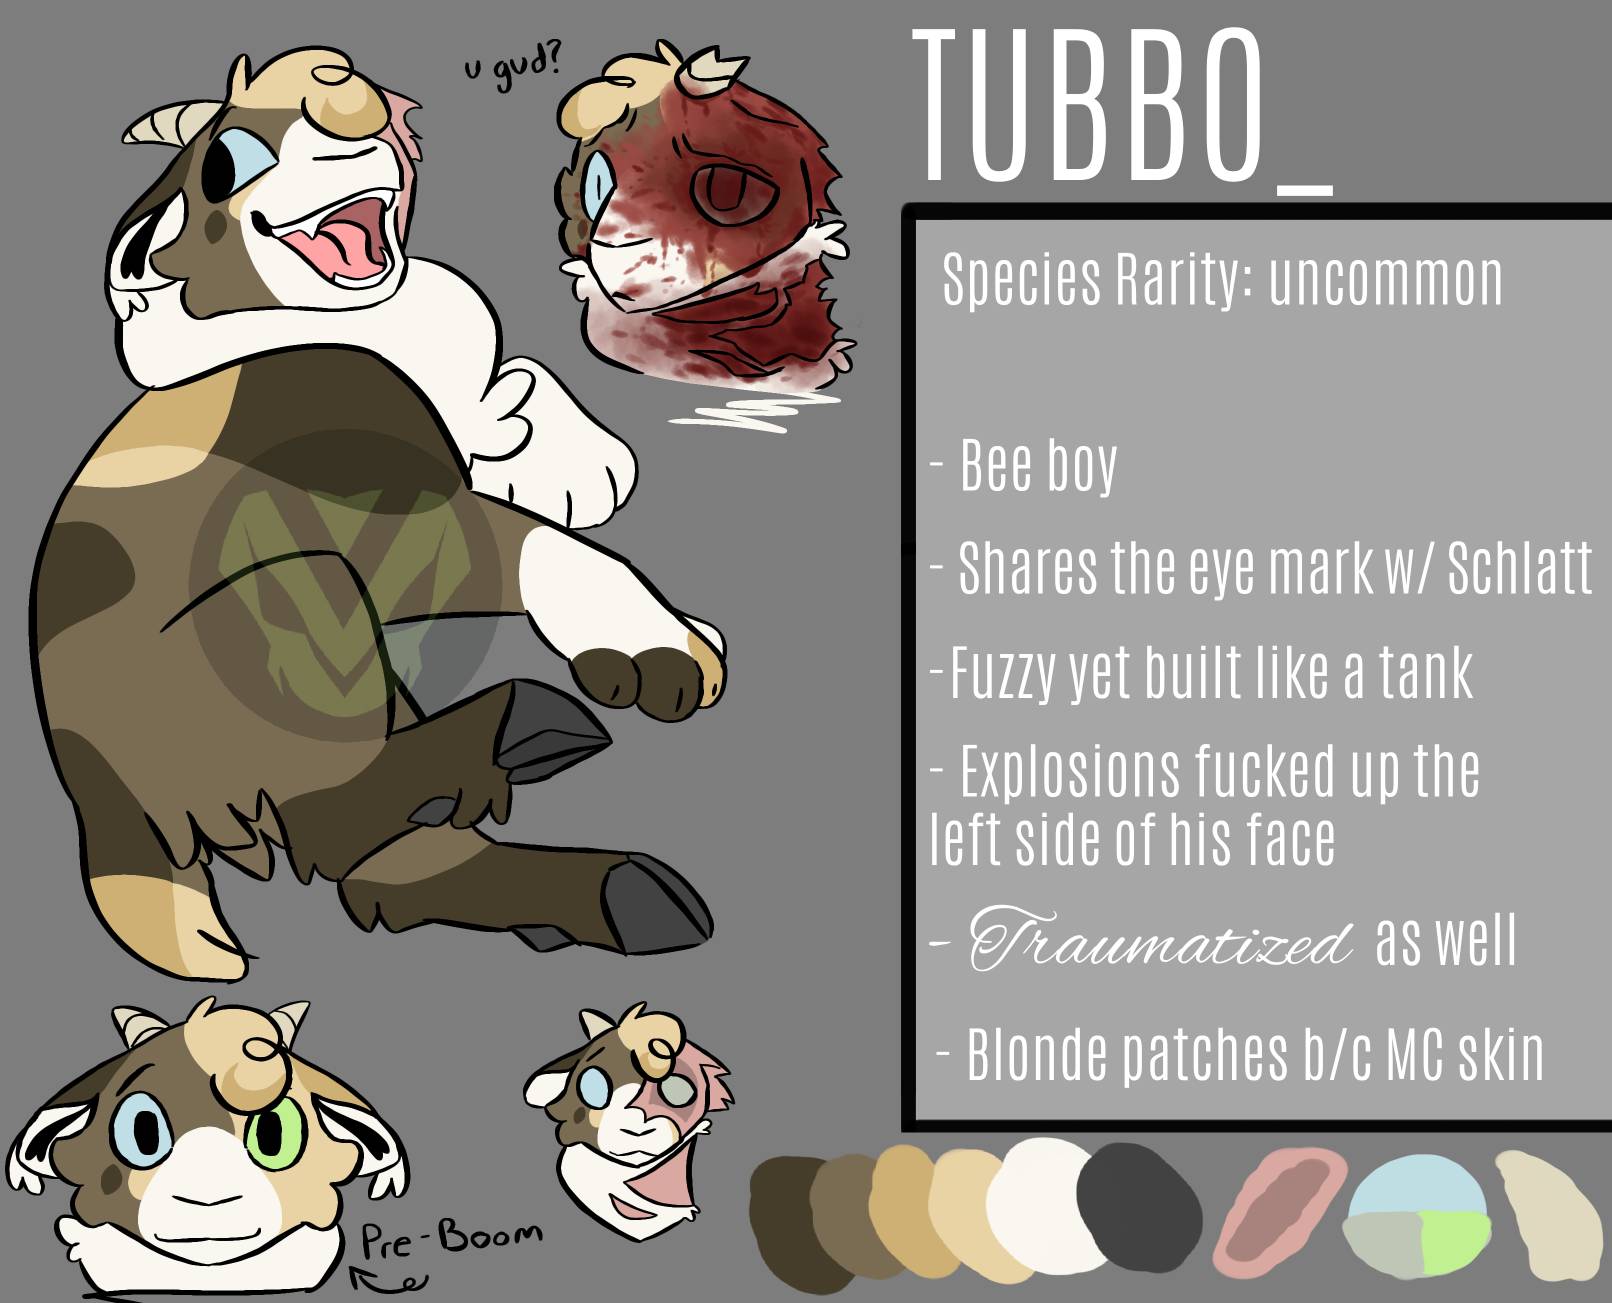 Tubbo Character Design by Grimmijaggers on DeviantArt